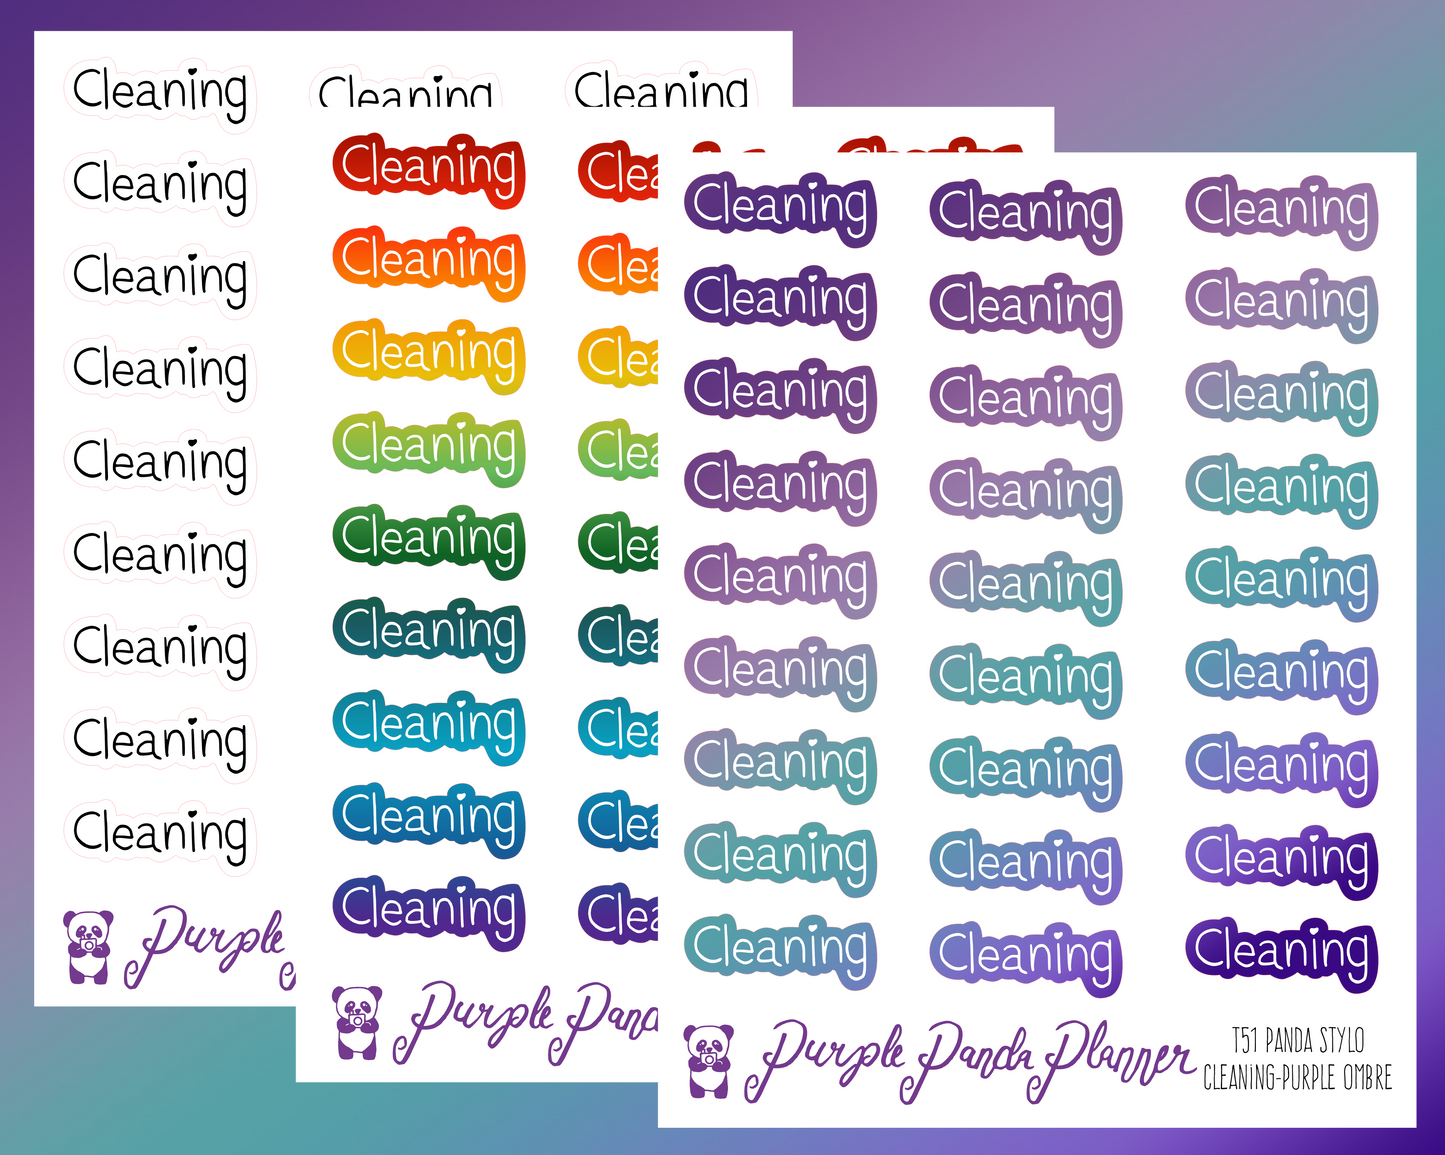 Cleaning (T51) - Panda Stylo Script - Black, Rainbow, or Purple Ombre - Stickers for Planner, Journal or Calendar